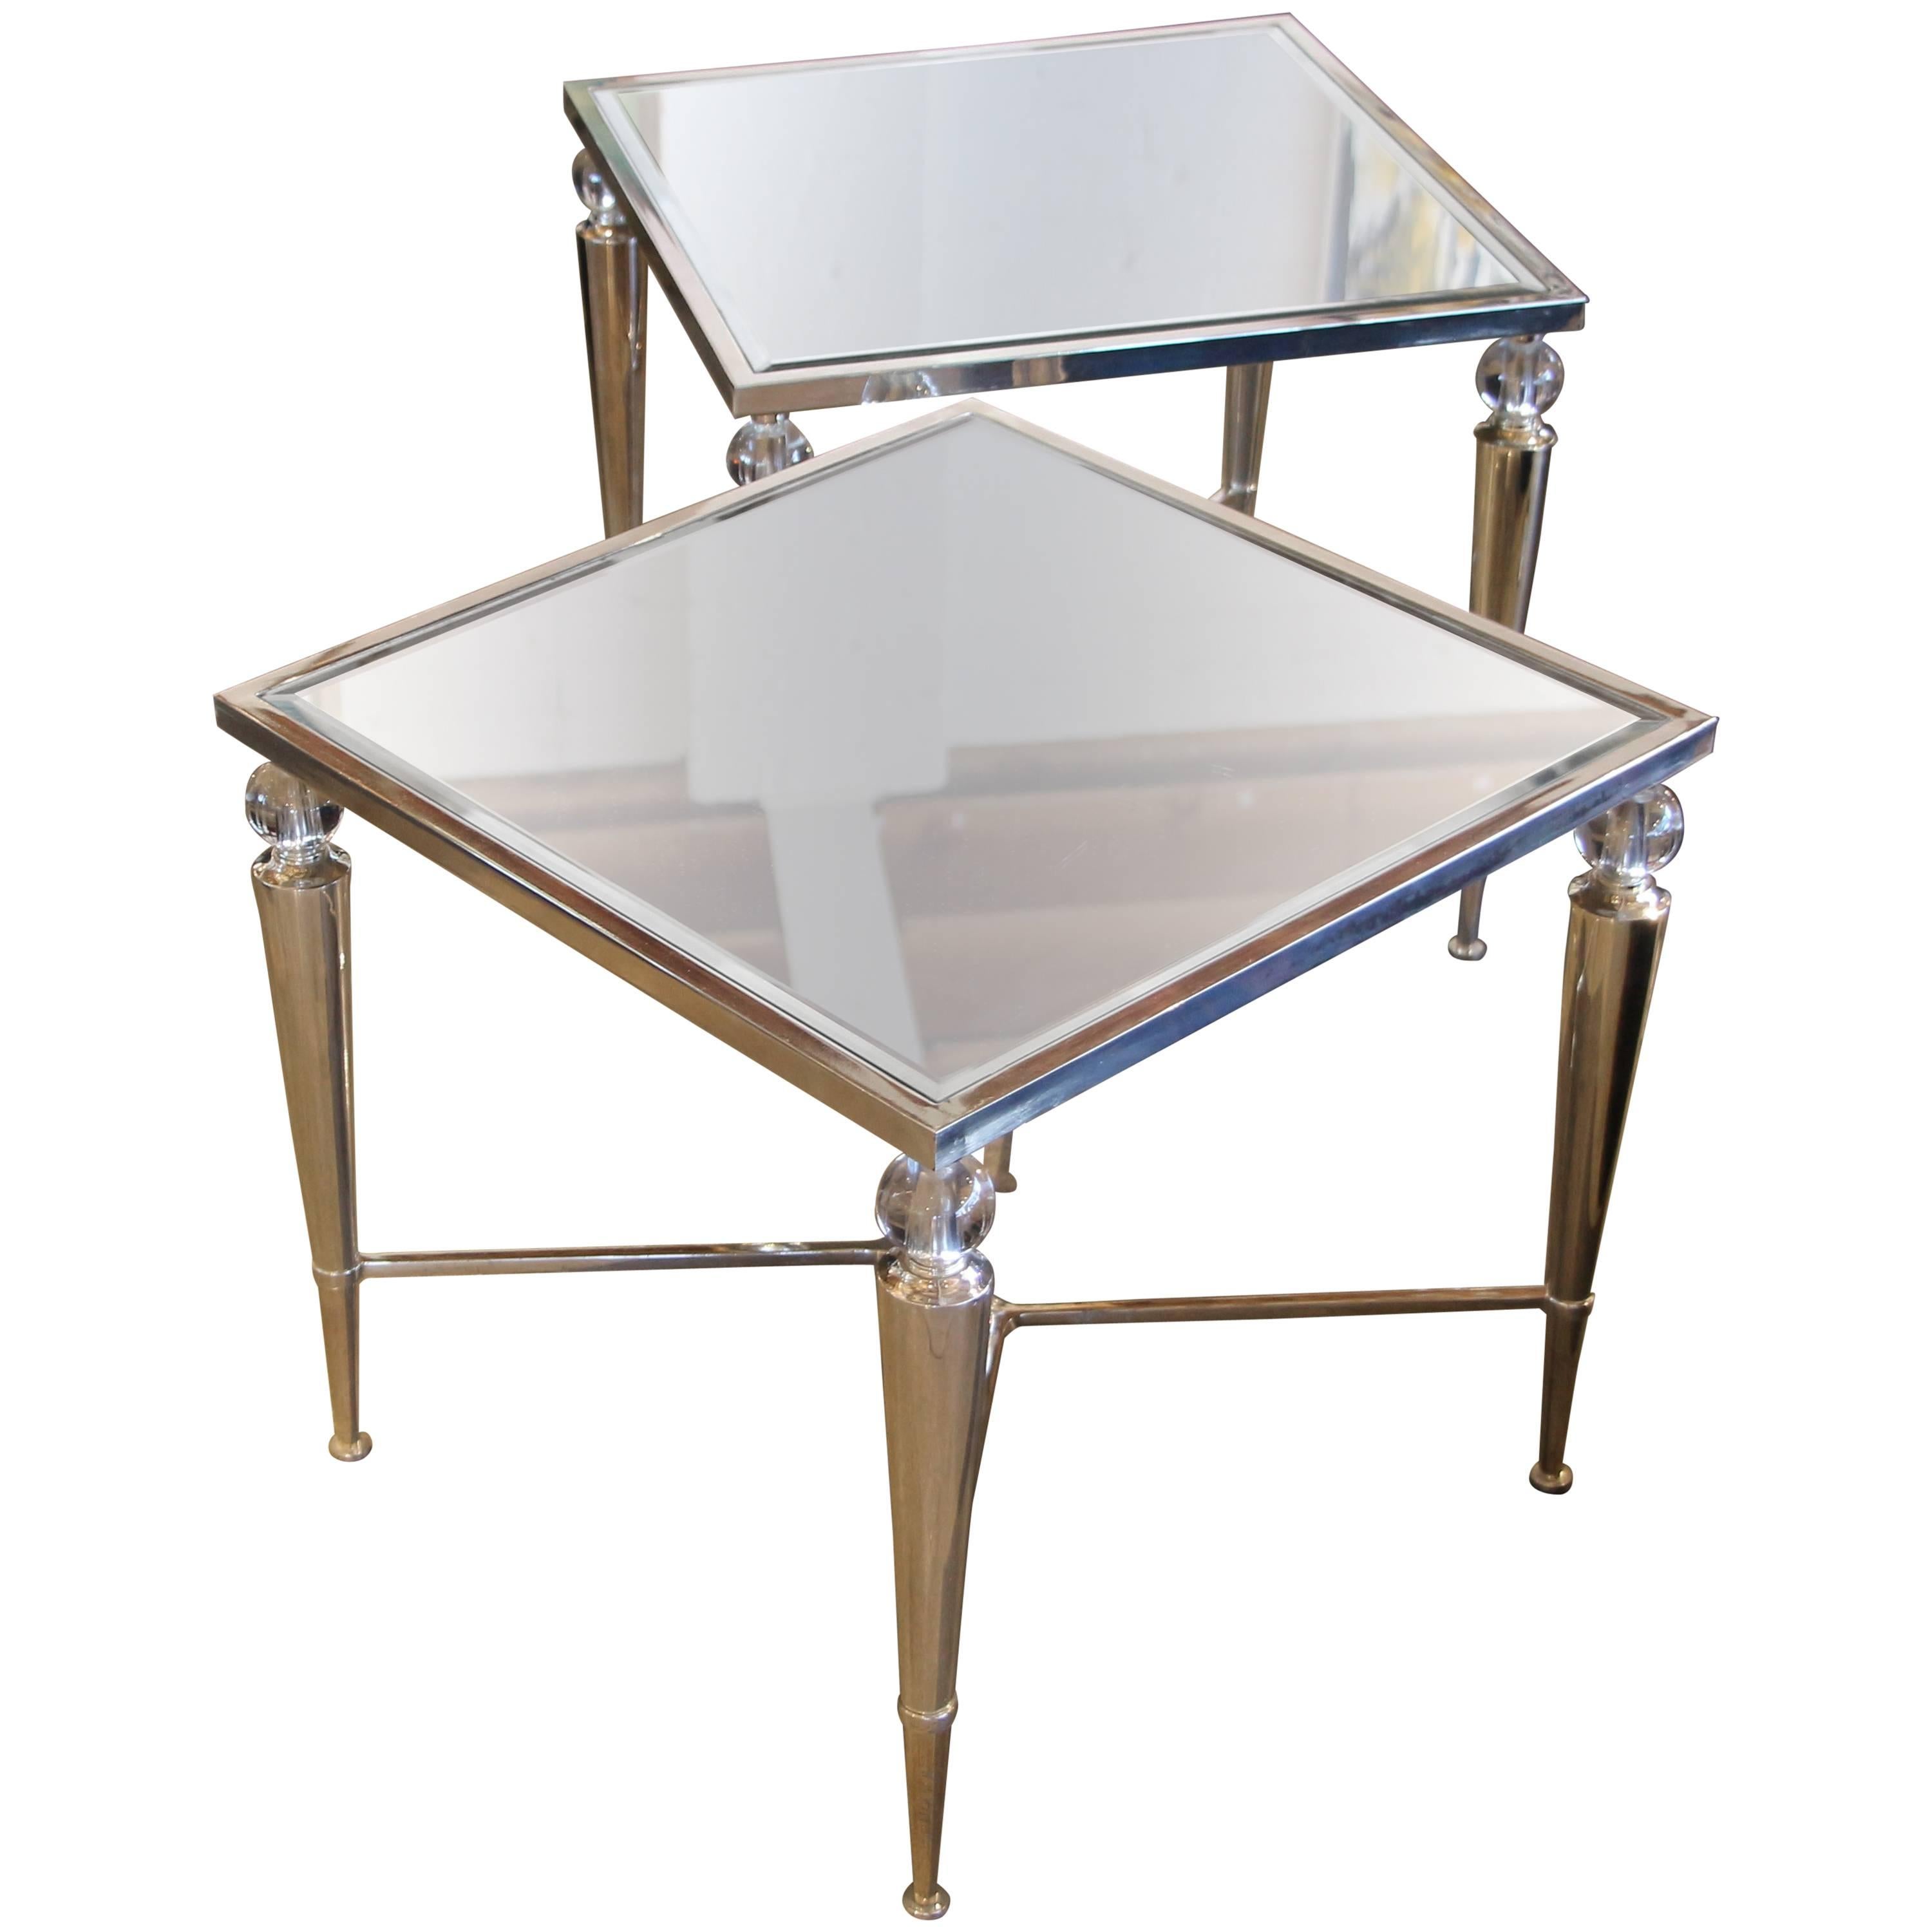 Two Elegant Mirror Top Silver and Glass Ball Tables